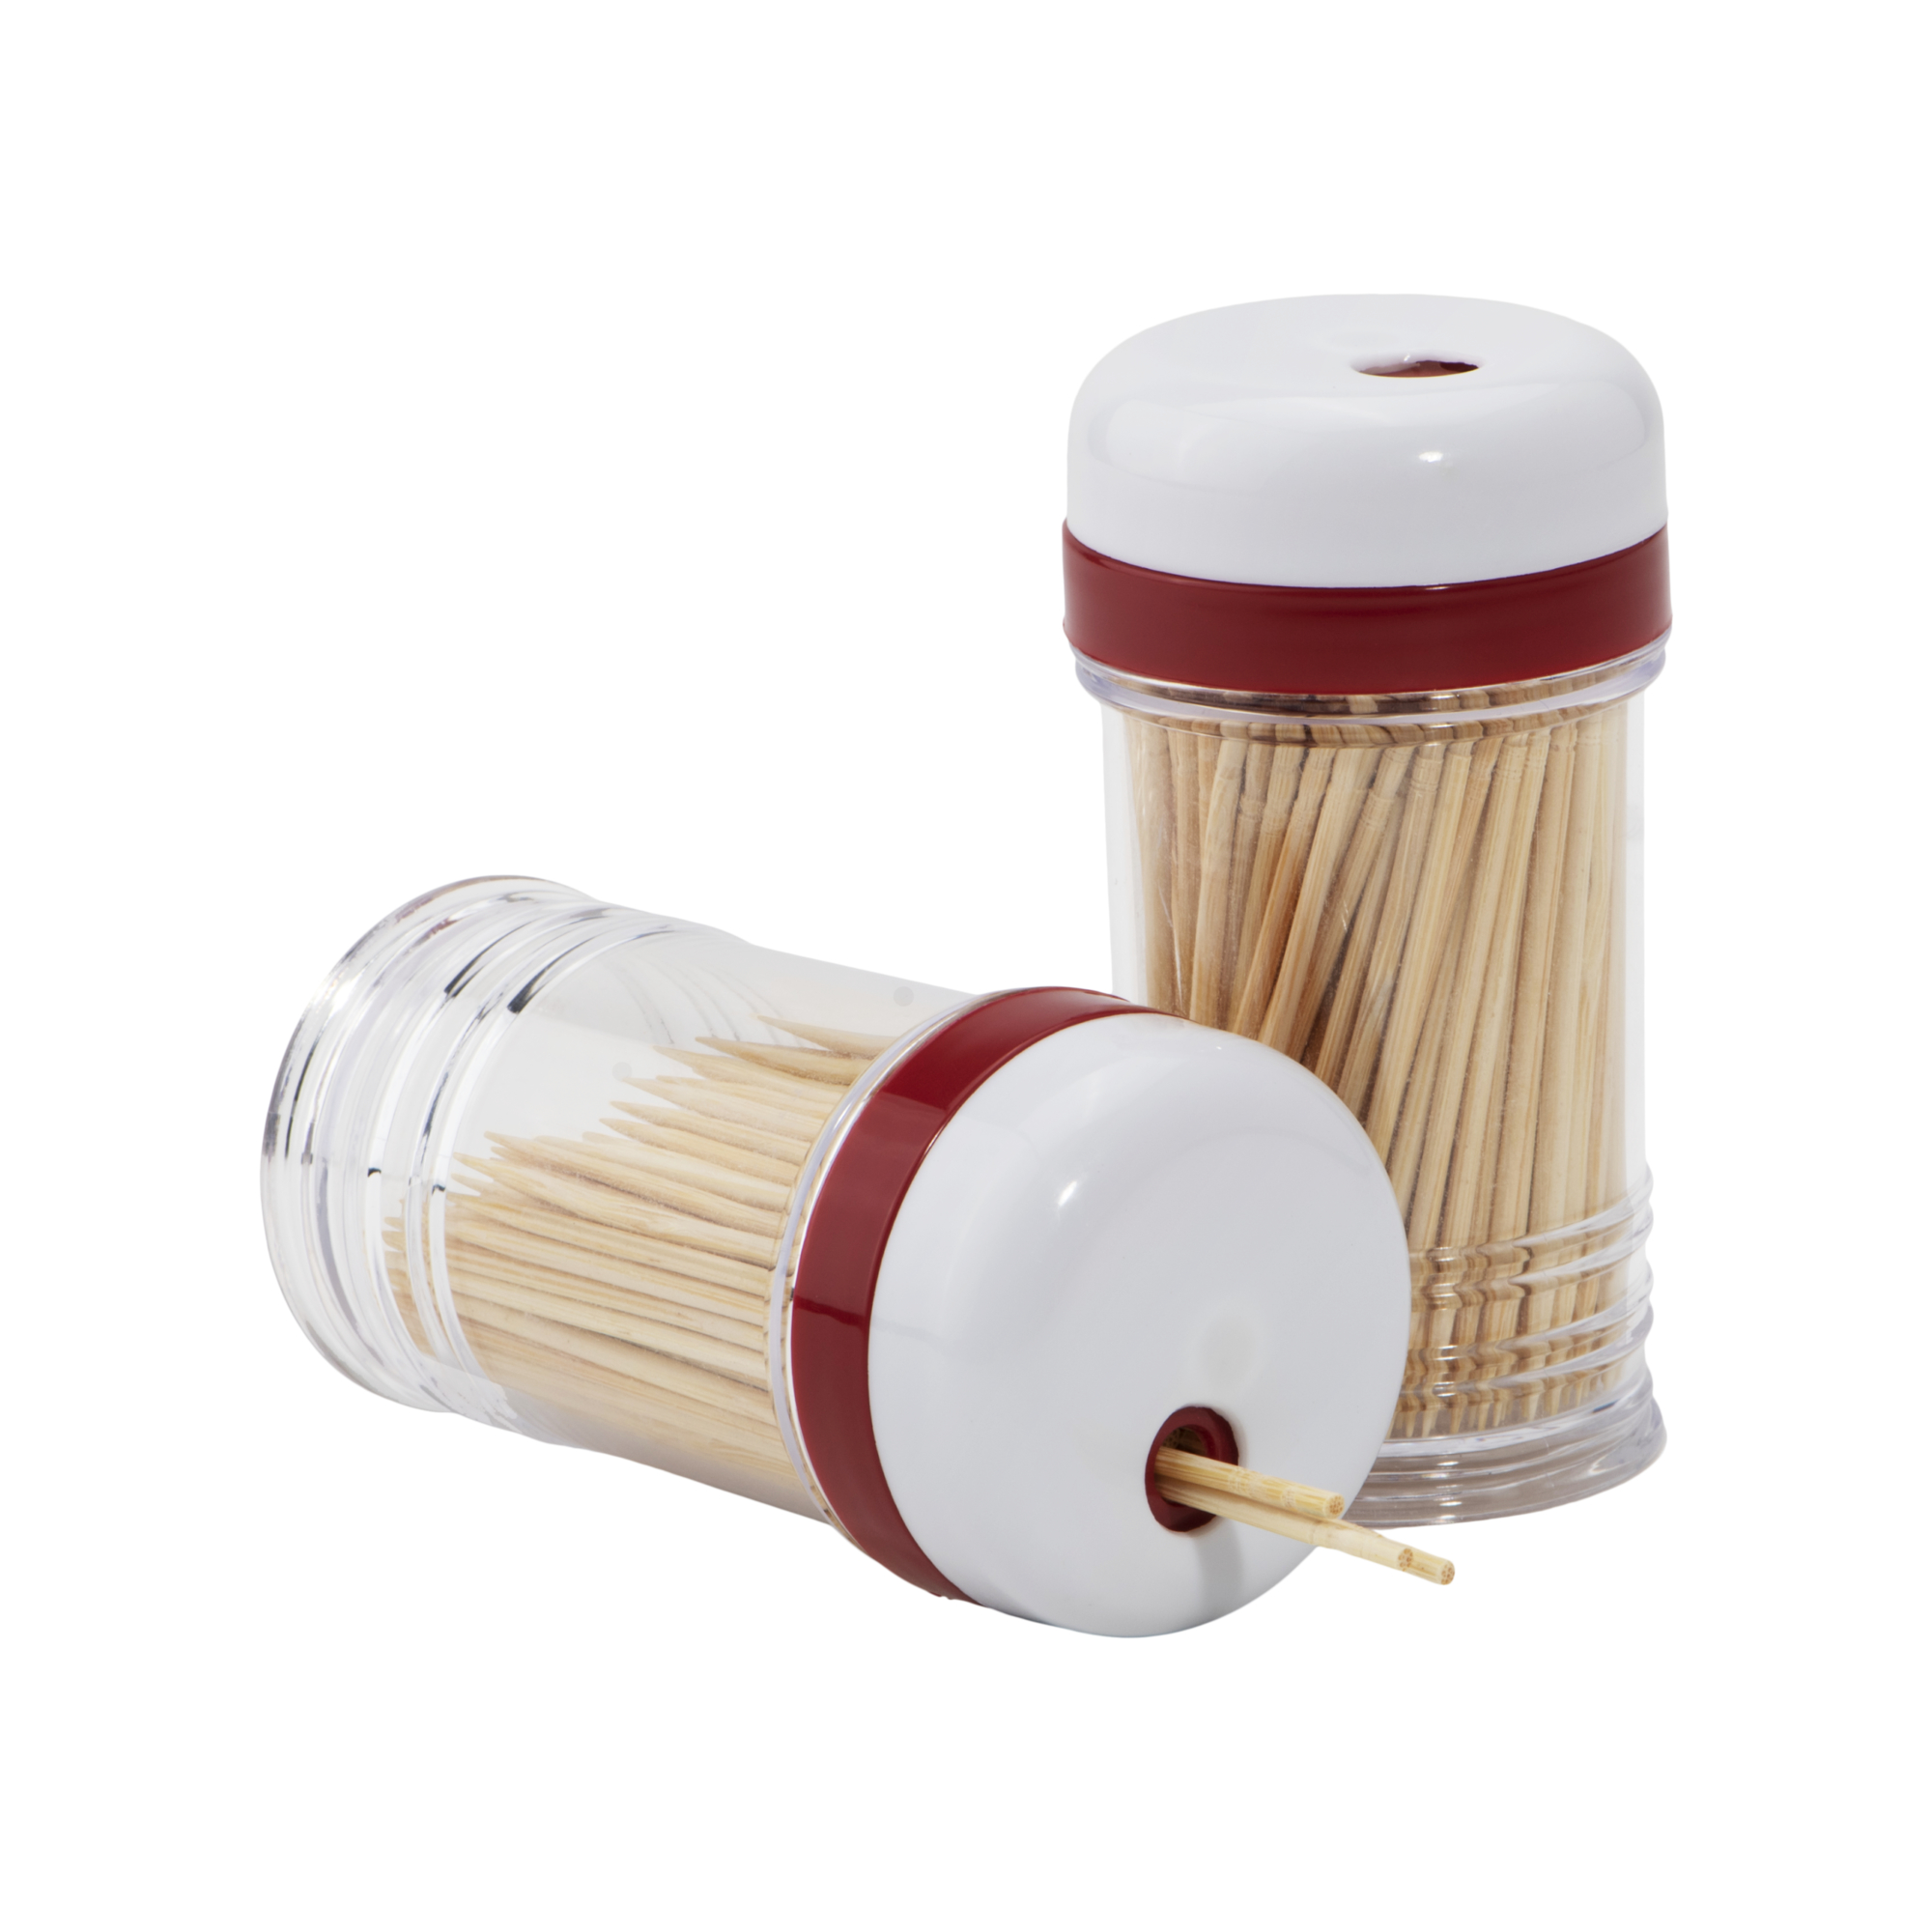 GoodCook PROfreshionals 2-Piece Shake-a-Pick Toothpick Dispenser Set with 400 Bamboo Toothpicks, 3.50" Height - image 1 of 5